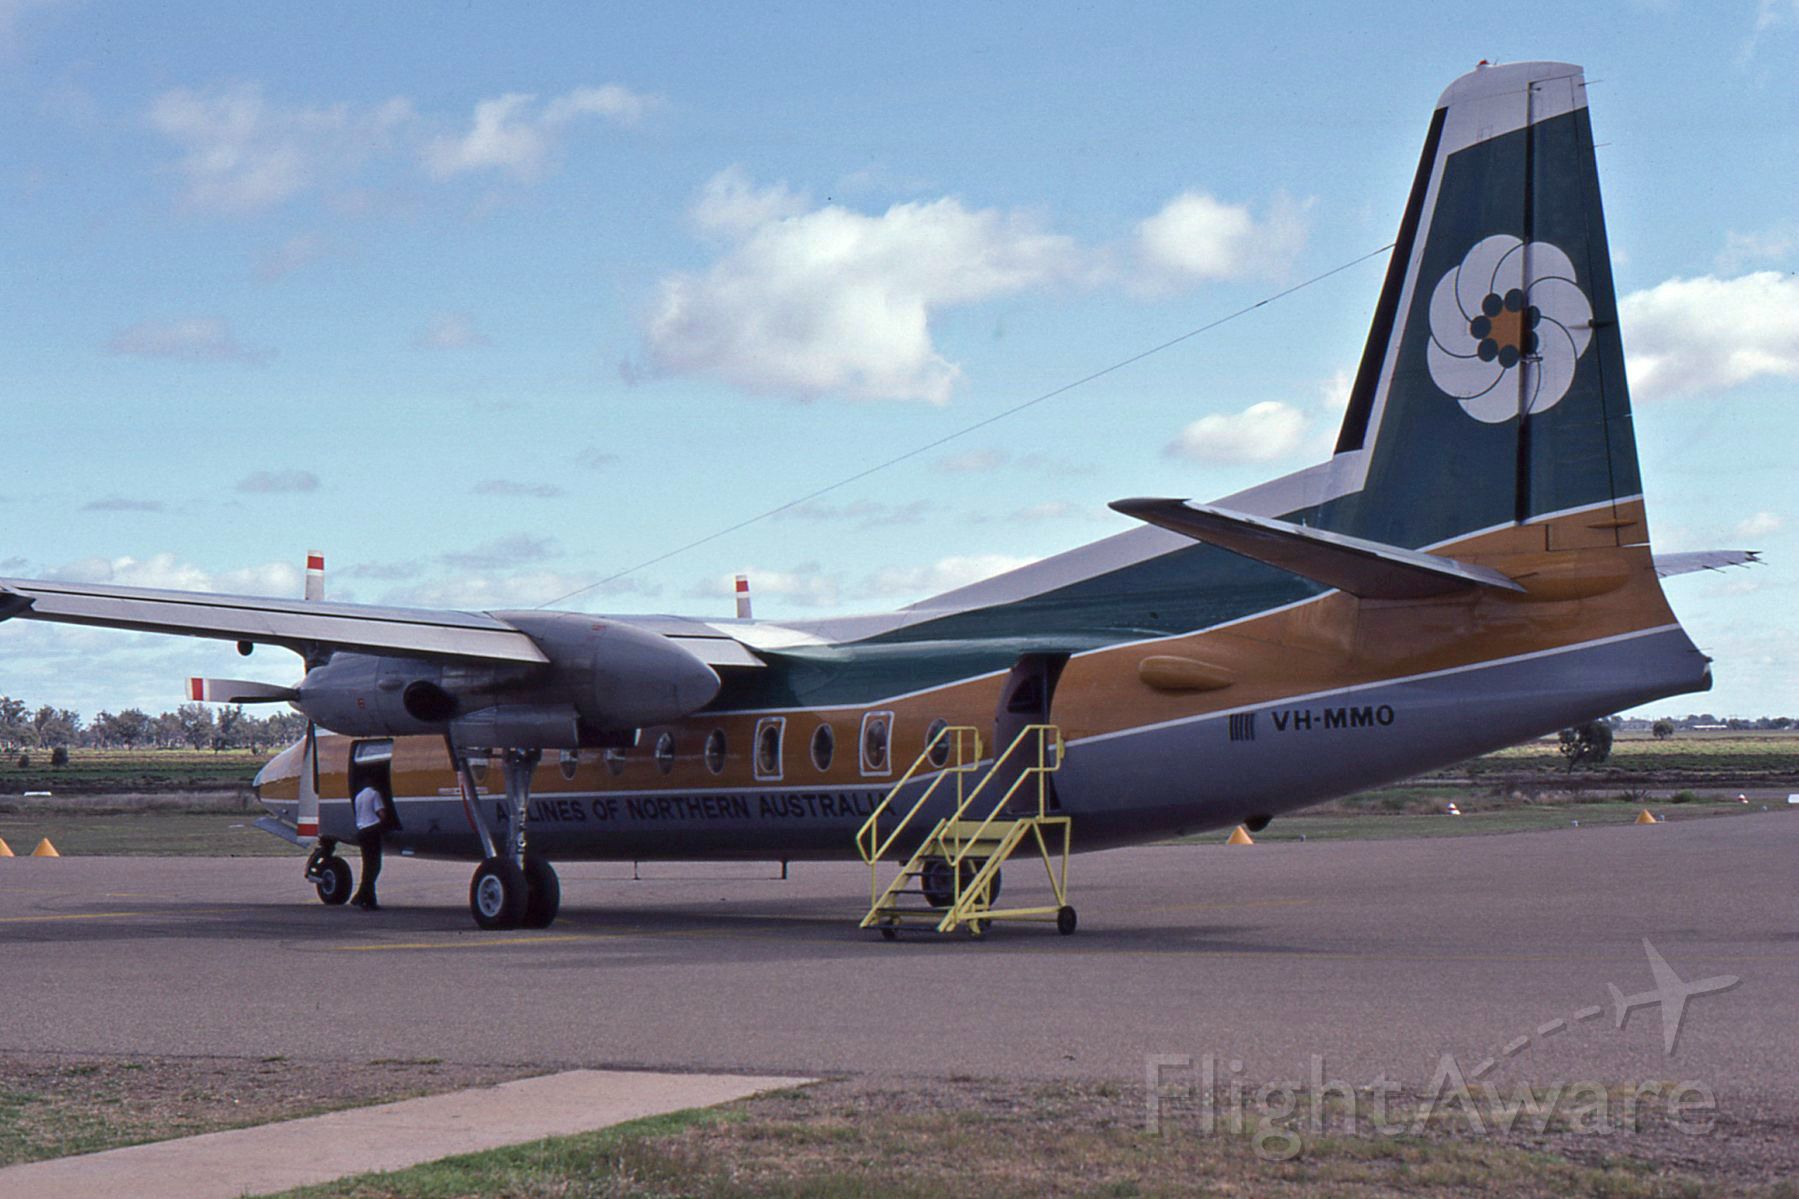 FAIRCHILD HILLER FH-227 (VH-MMO) - Aneett Airlines Fokker F27 VH-MMO at Moree whilst operating an Airlines of NSW Service to Moree from Sydney in 1985.